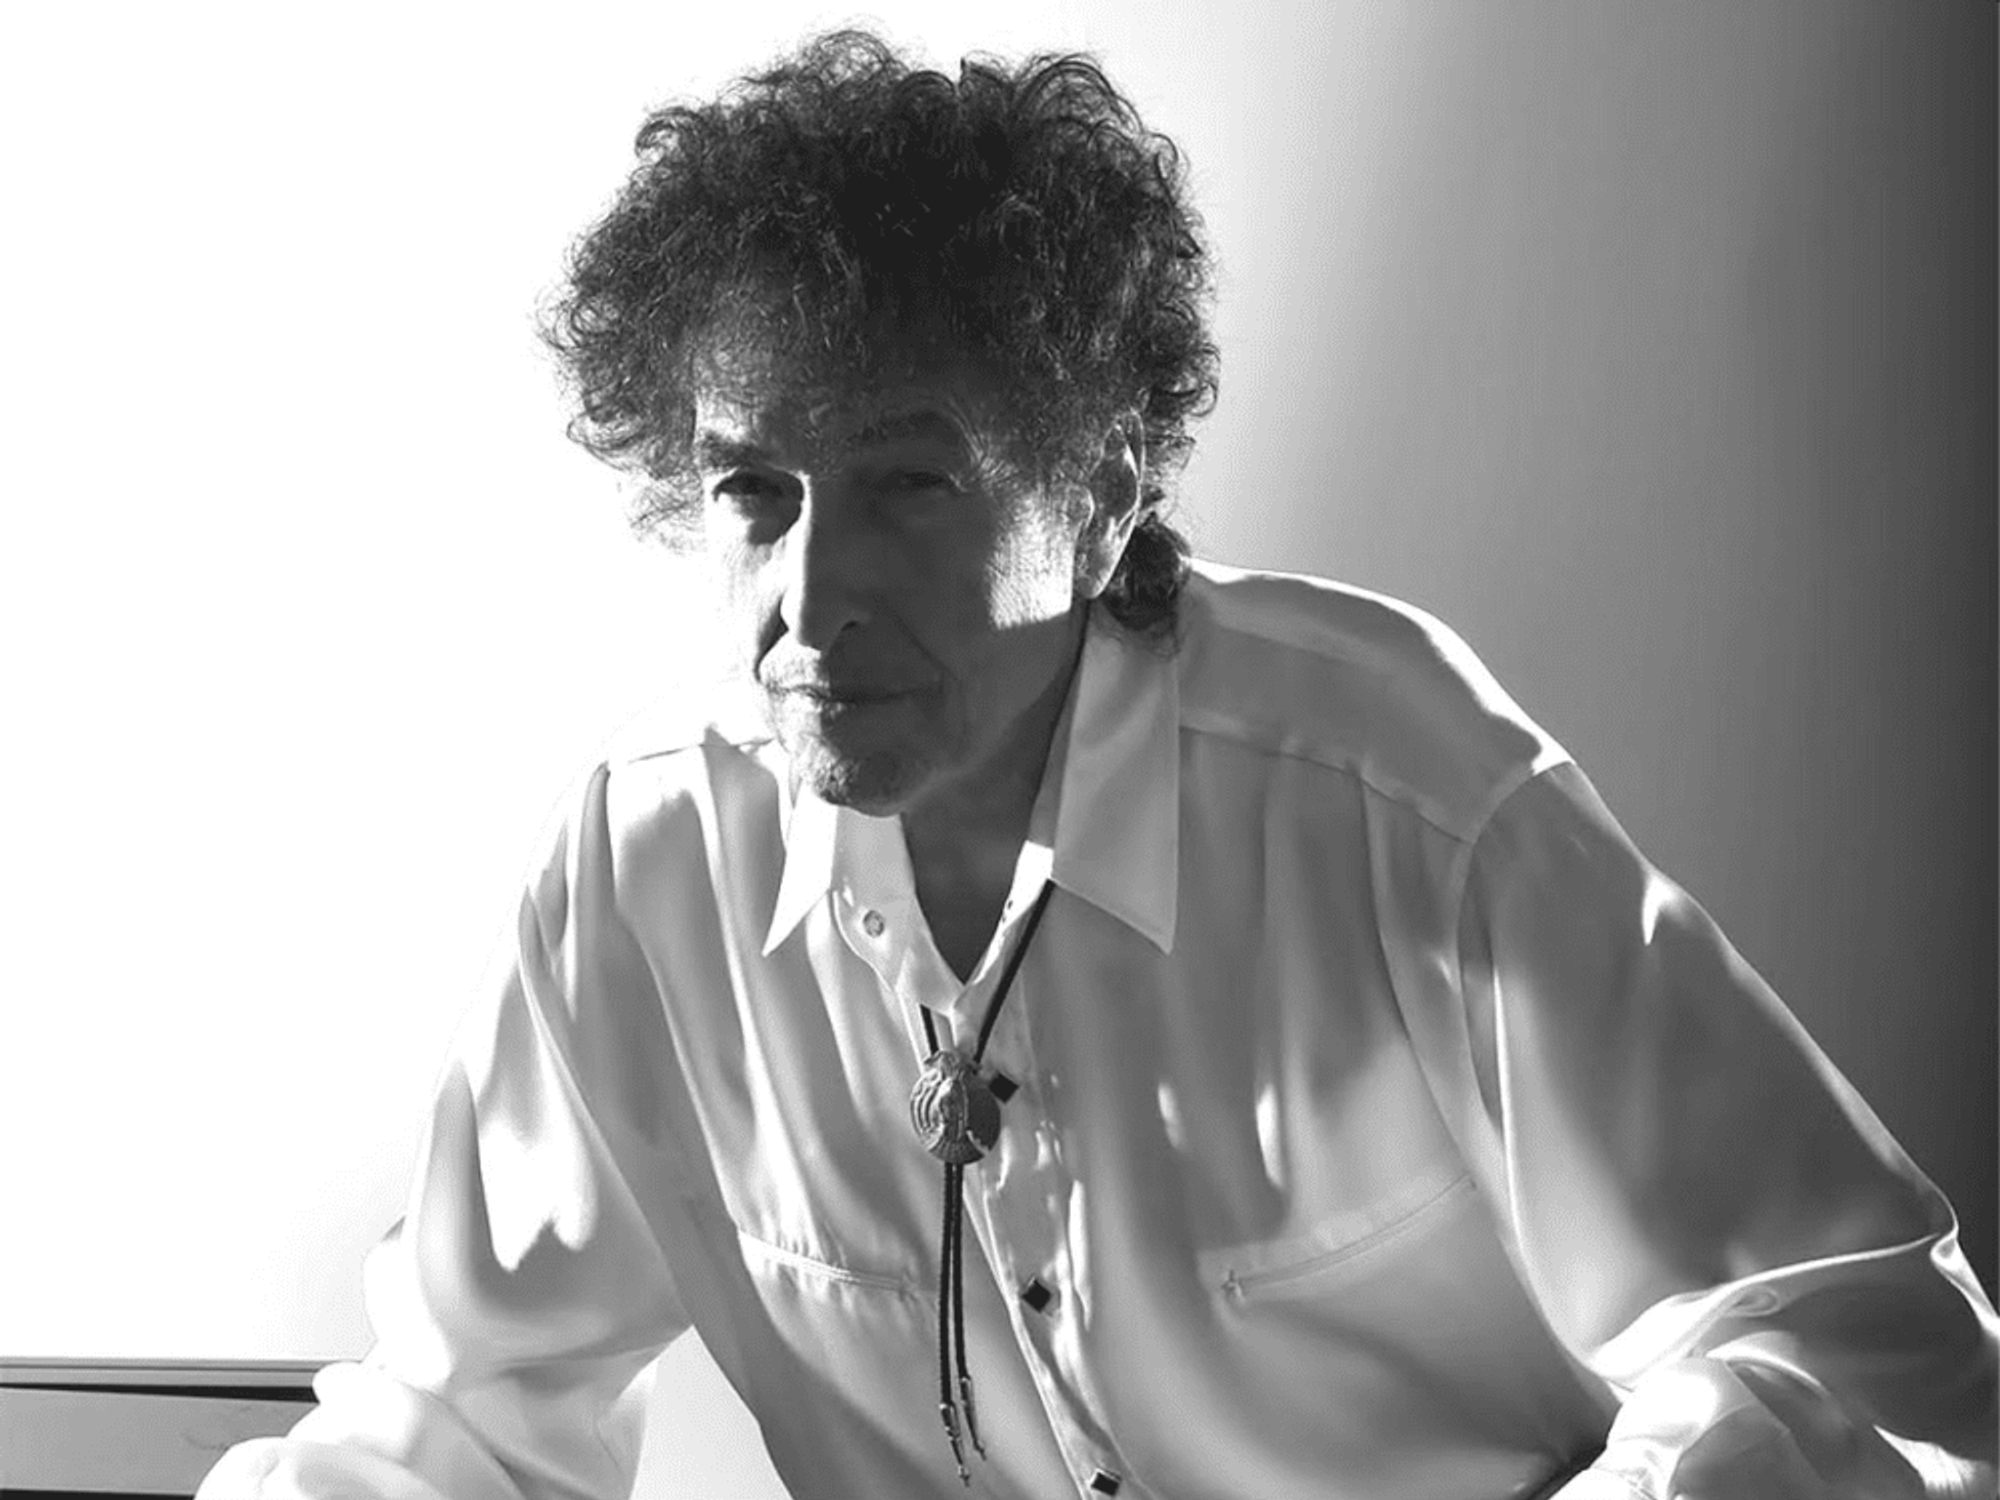 The iconic Bob Dylan will play Sugar Land on Sunday, October 14.